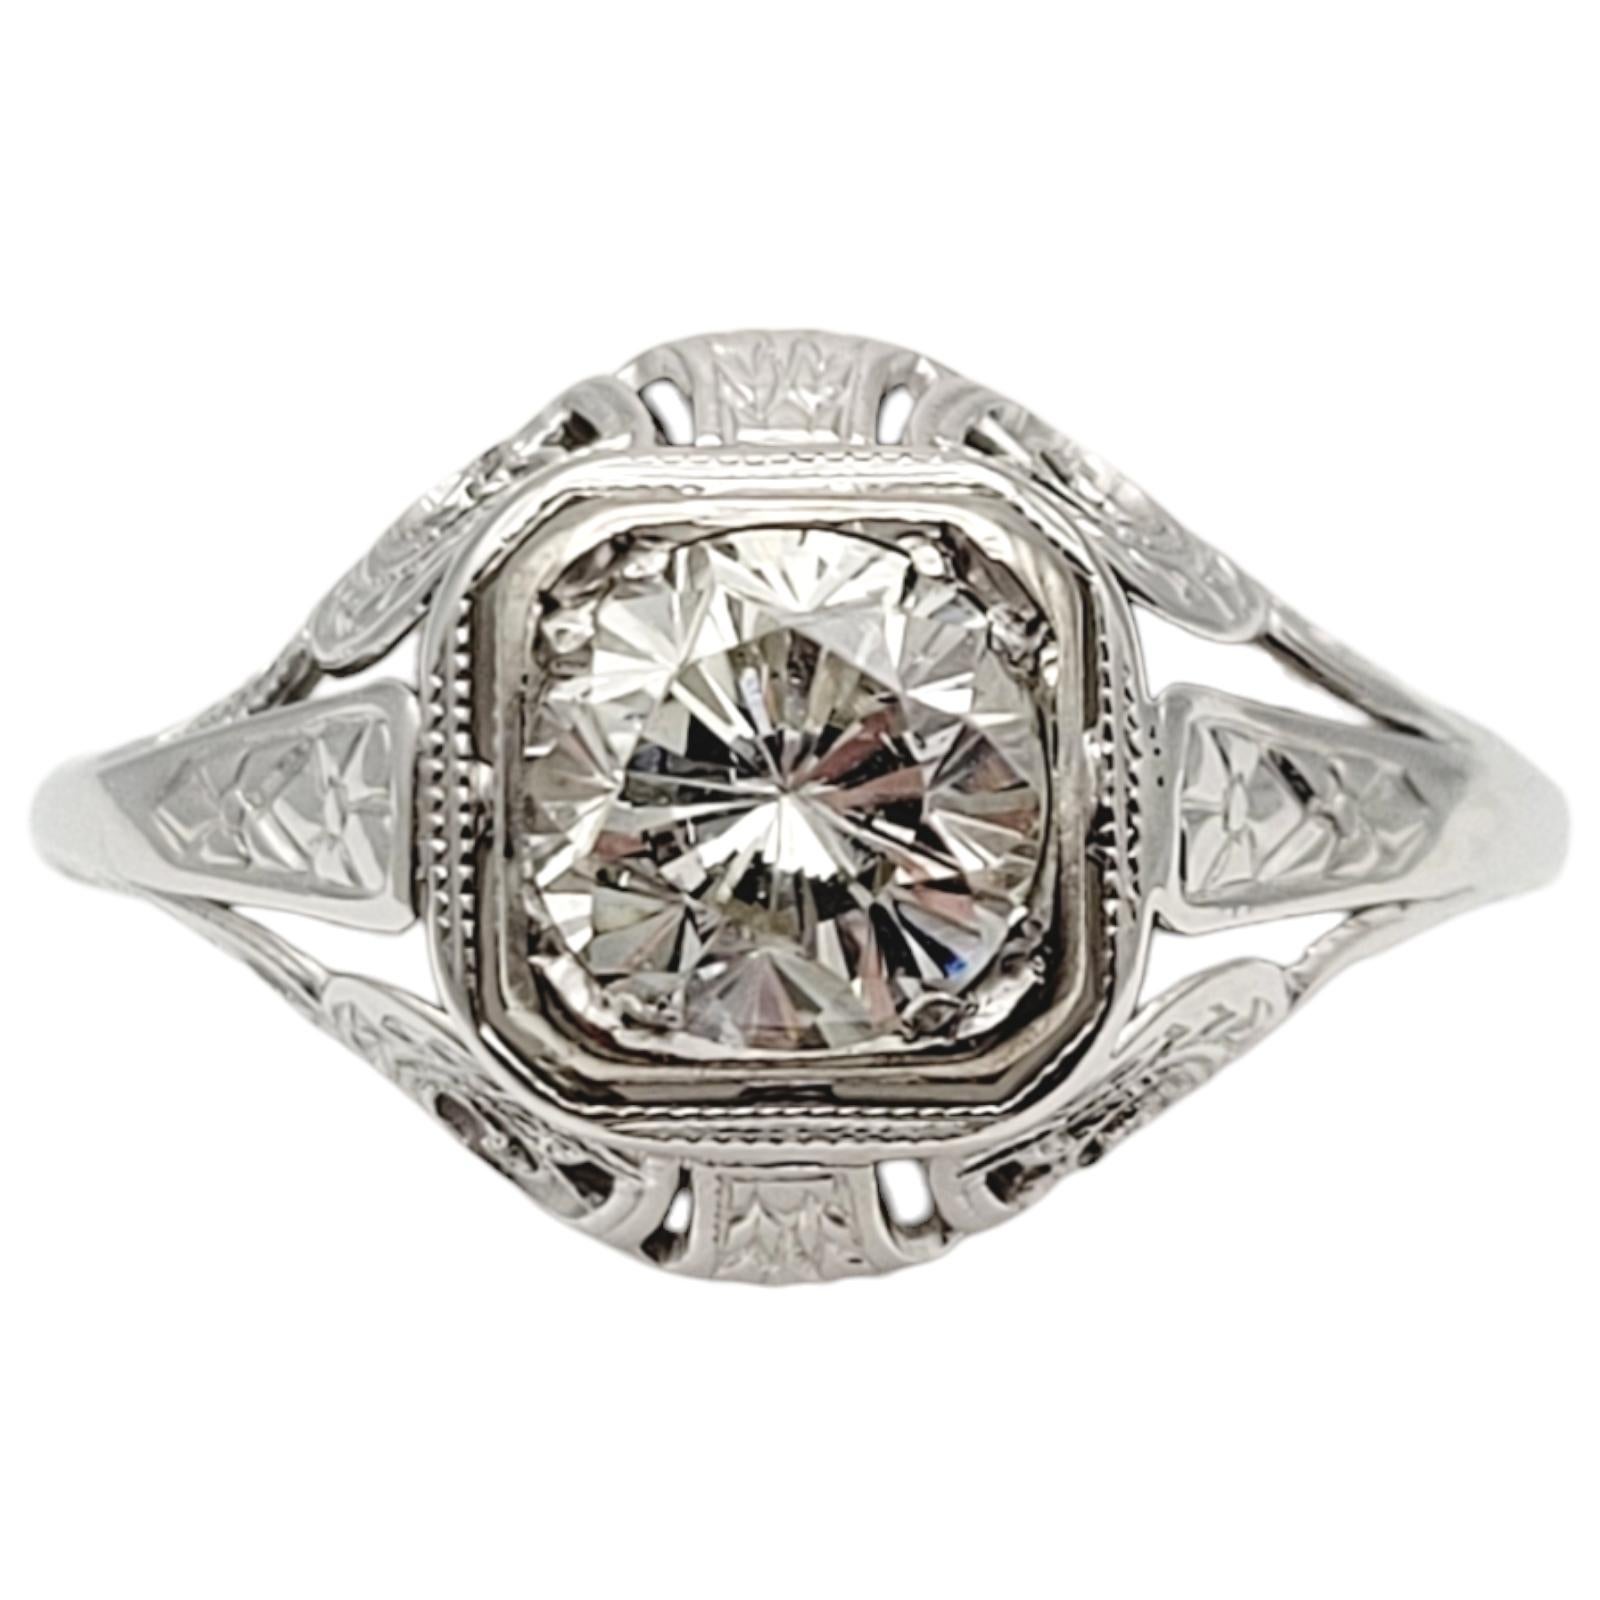 Ring Size: 6.25

Introducing a stunning Vintage Early Modern Cut Solitaire Diamond Engagement Ring. This exquisite piece combines timeless elegance with a touch of vintage allure. With its classic design and exceptional diamond, this ring symbolizes